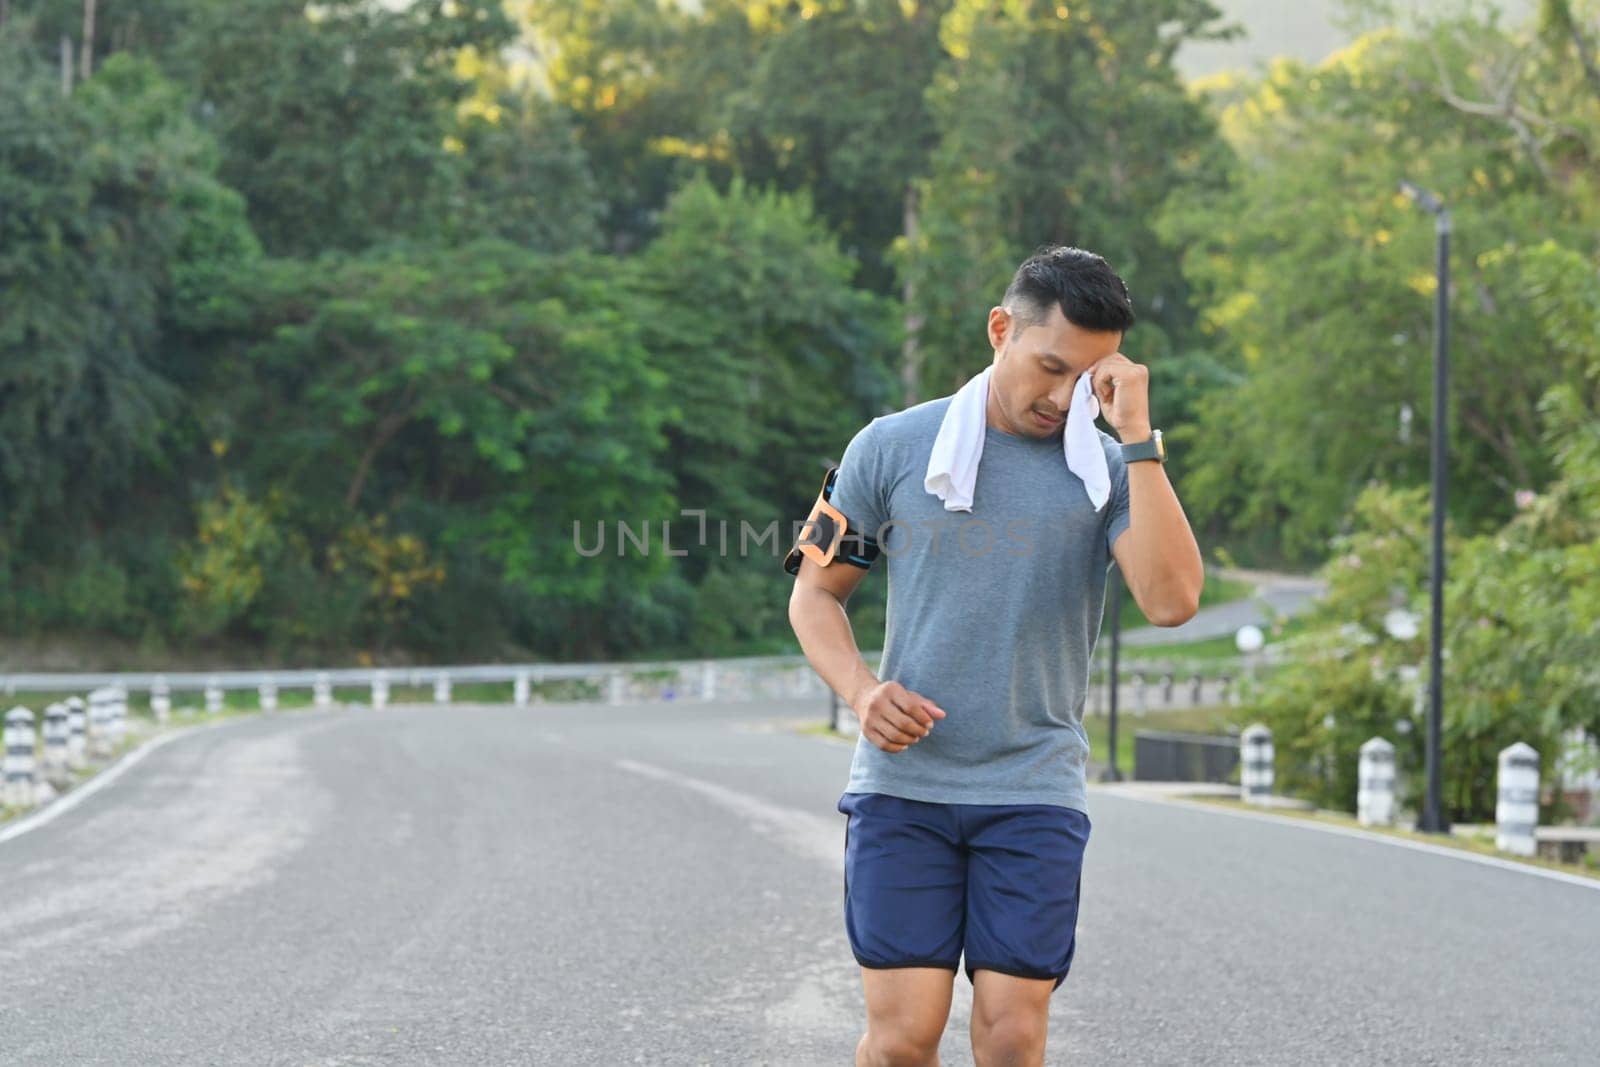 Shot of man runner wiping sweat with a towel while running in the city park.